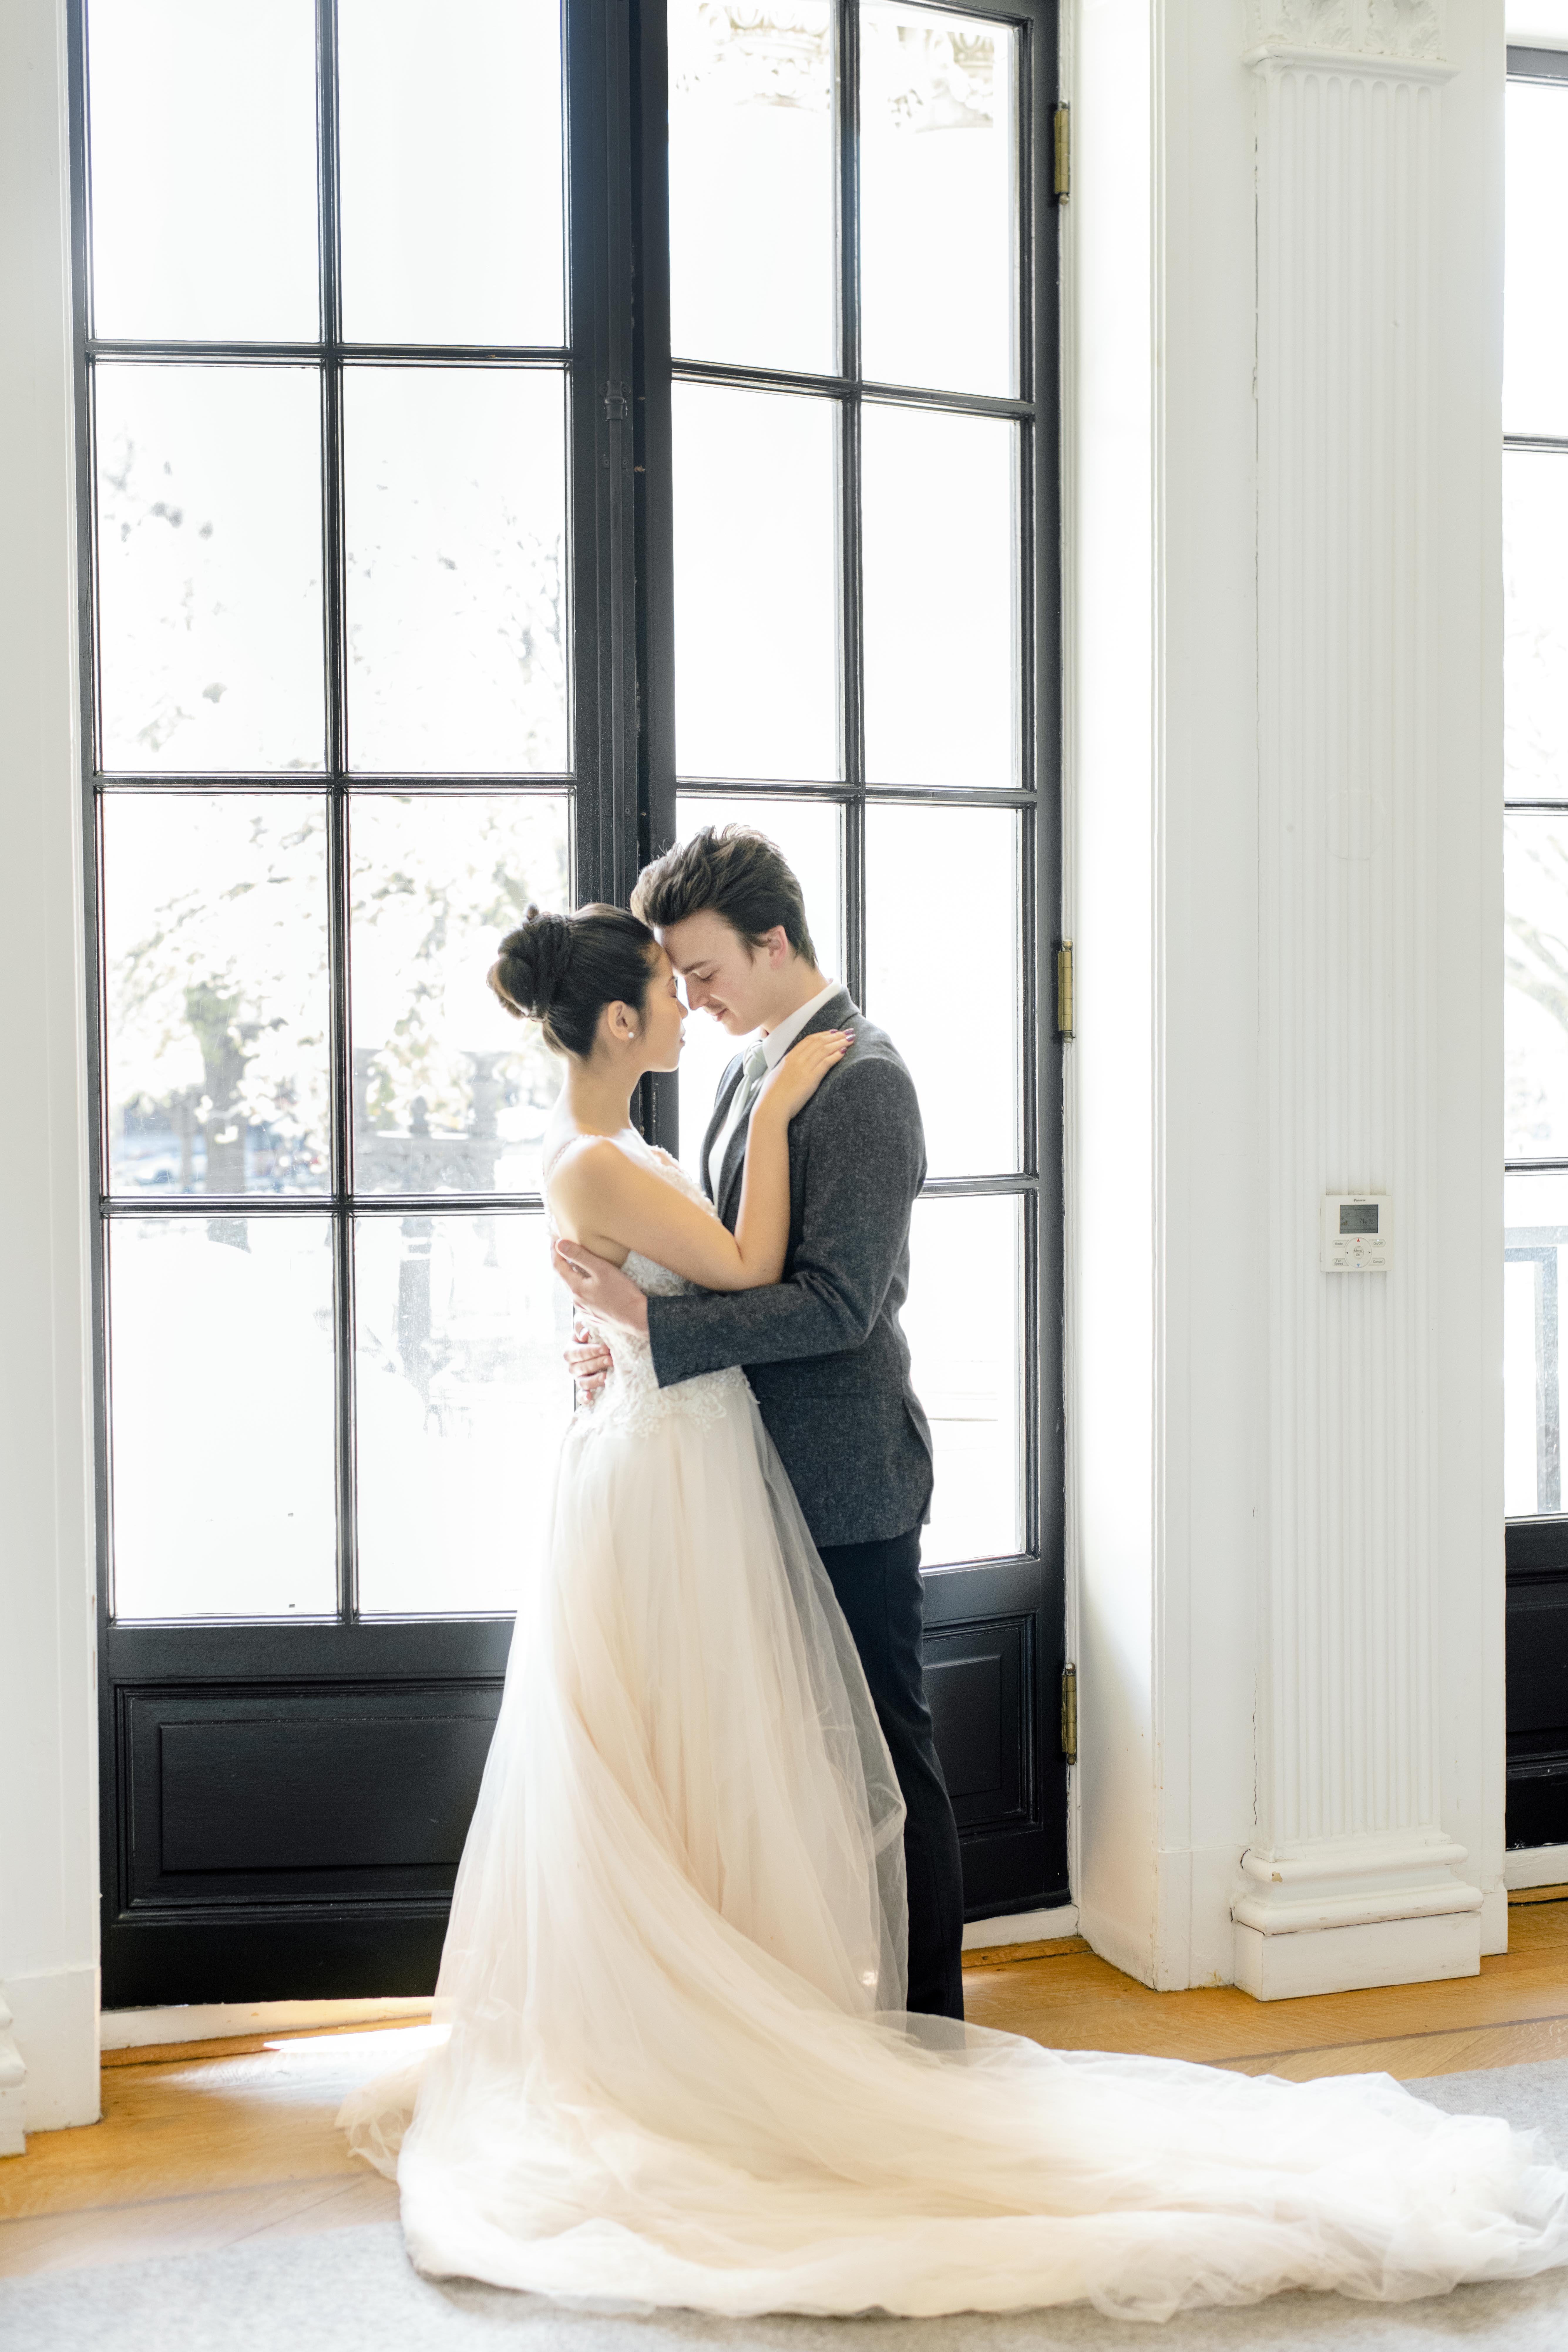 Questions To Ask When Hiring A Wedding Photographer